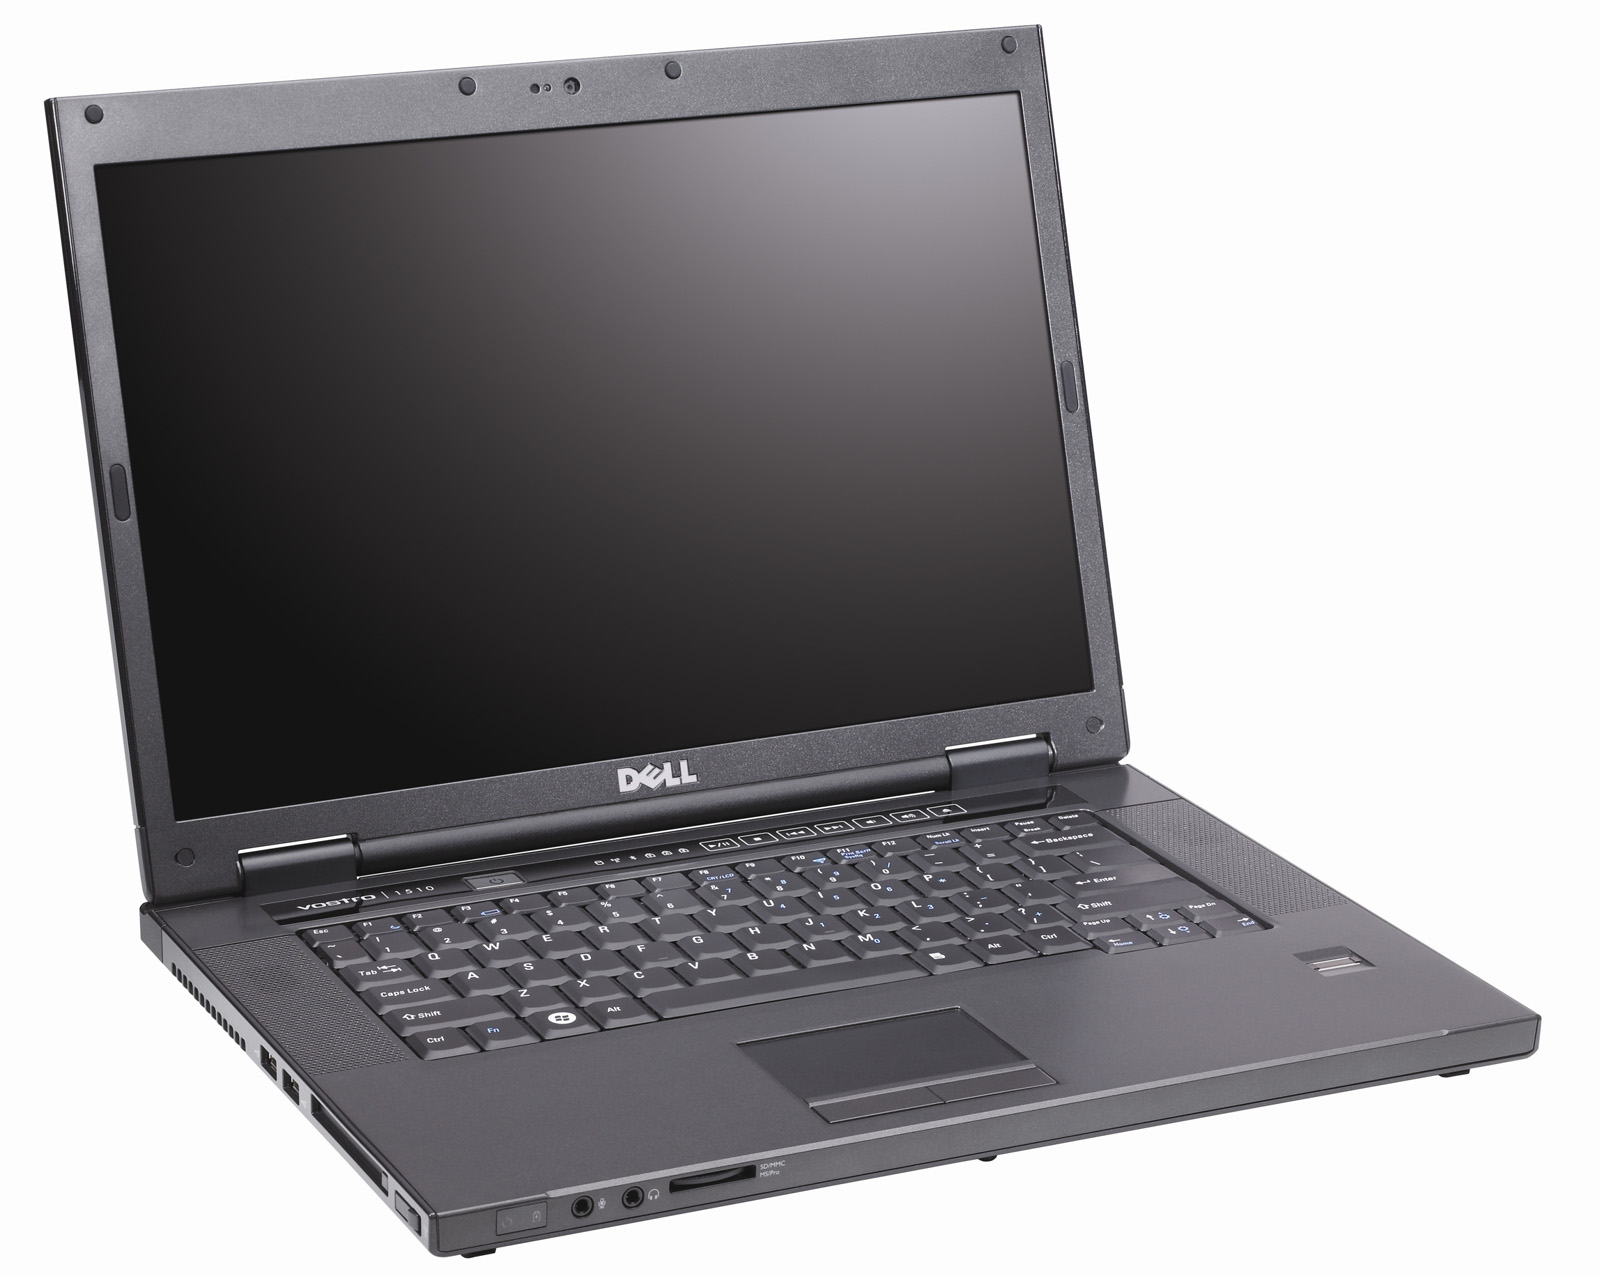 Dell Delivers New Redesigned Vostro Laptops | TechPowerUp Forums